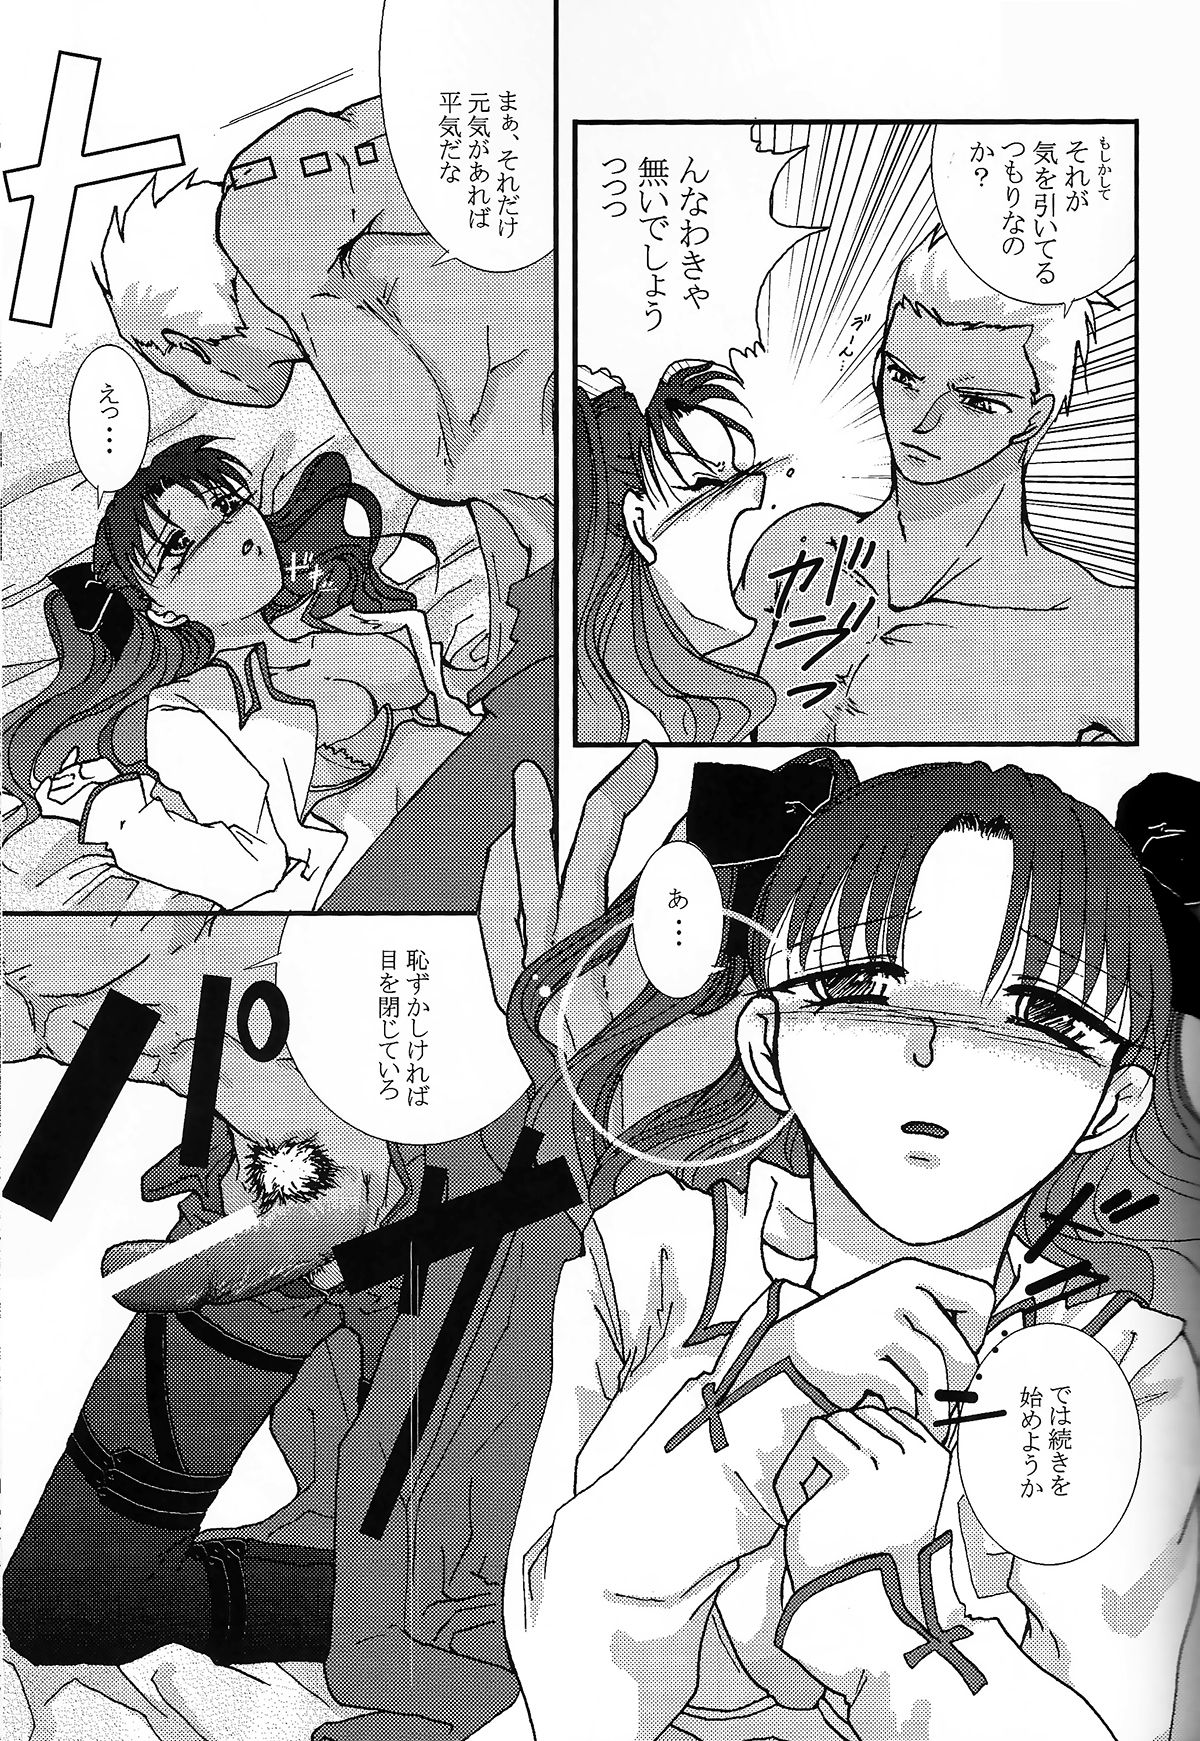 (SC24) [Takeda Syouten (Takeda Sora)] Question-7 (Fate/stay night) page 21 full